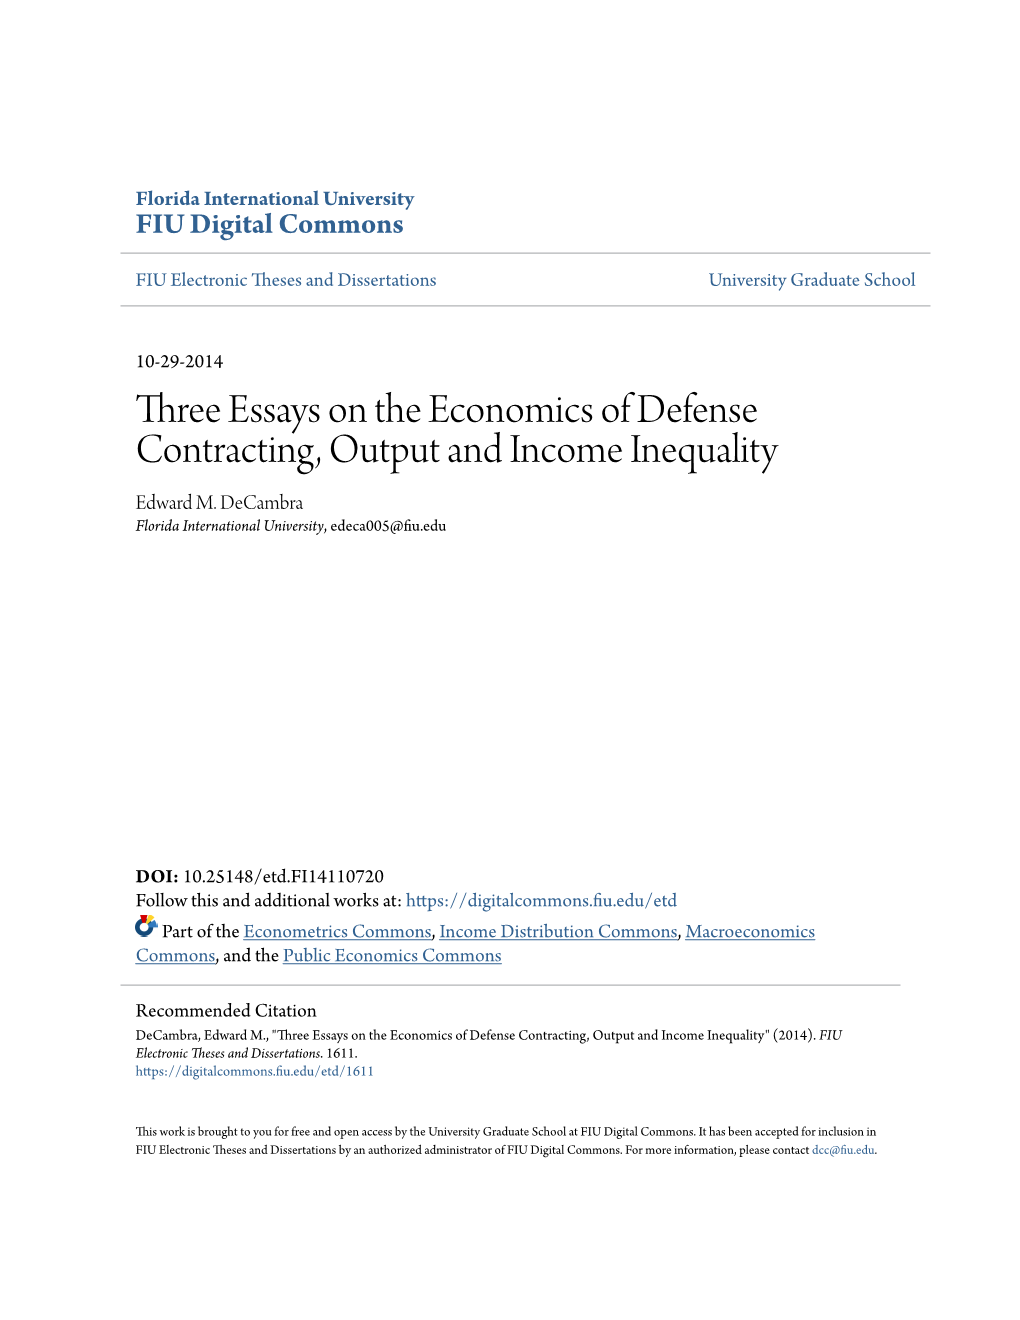 Three Essays on the Economics of Defense Contracting, Output and Income Inequality Edward M